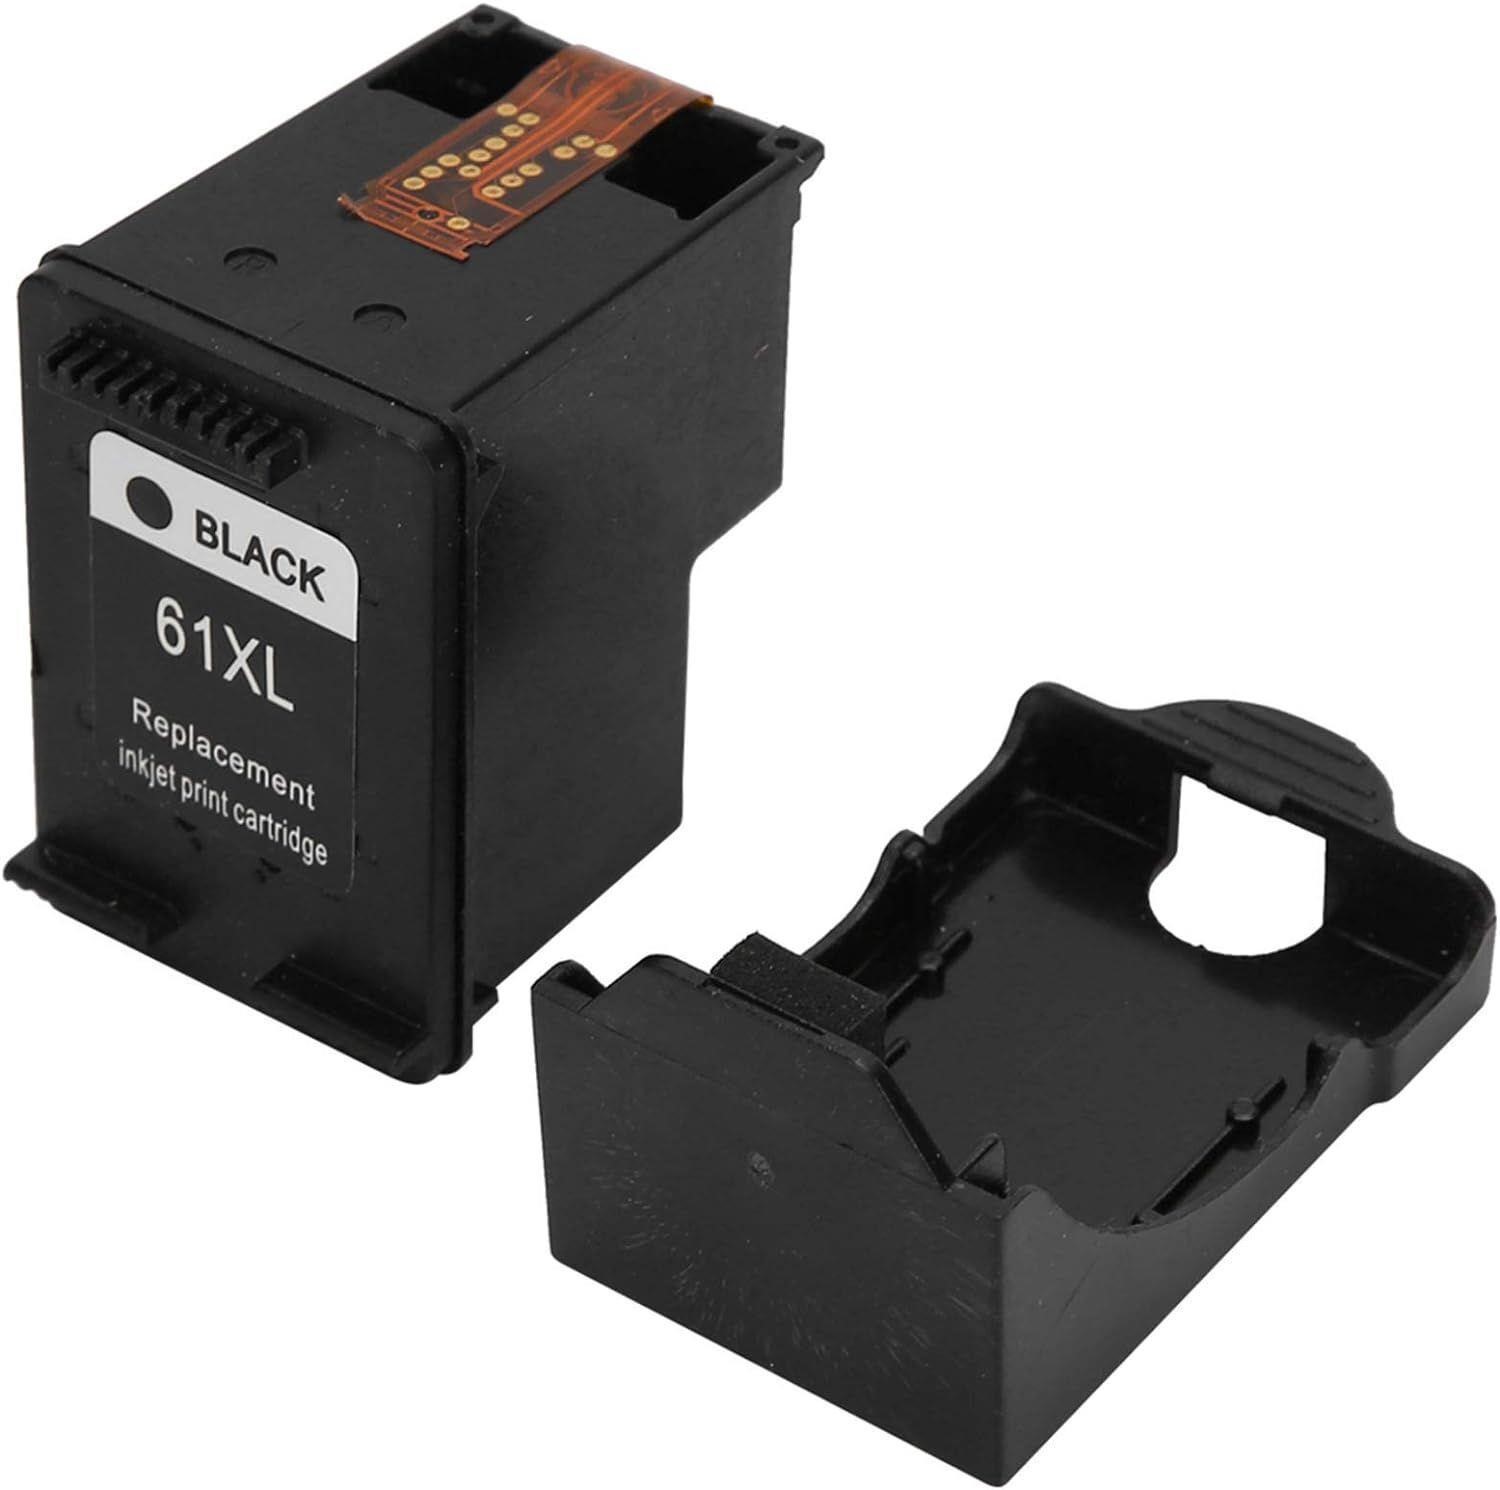 HP61xl Ink Cartridge, Disposable Shell